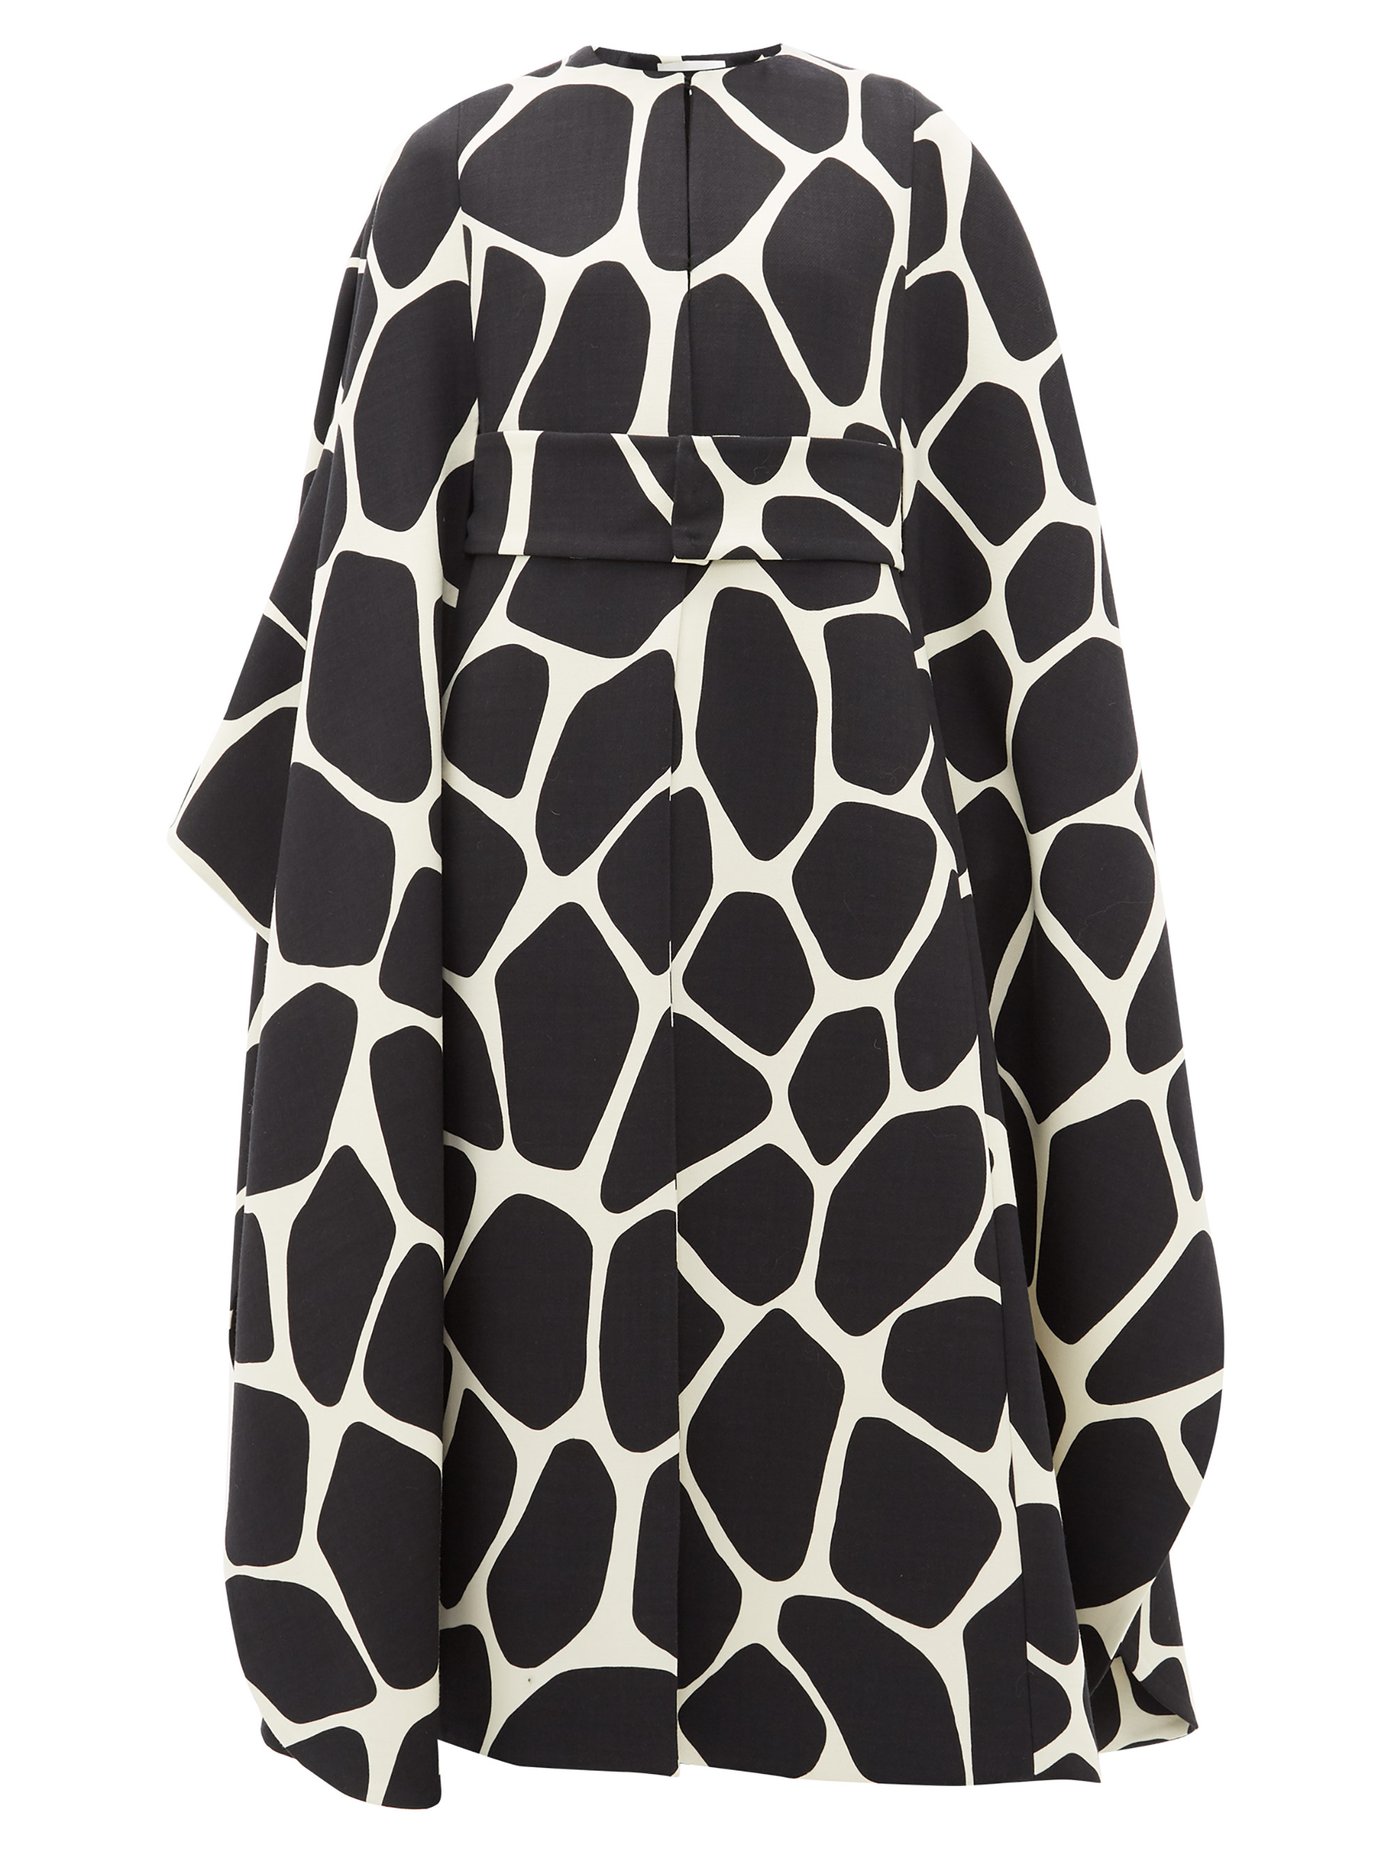 1966 giraffe-print belted wool-crepe cape by VALENTINO, available on matchesfashion.com for $3850 Heidi Klum Outerwear Exact Product 